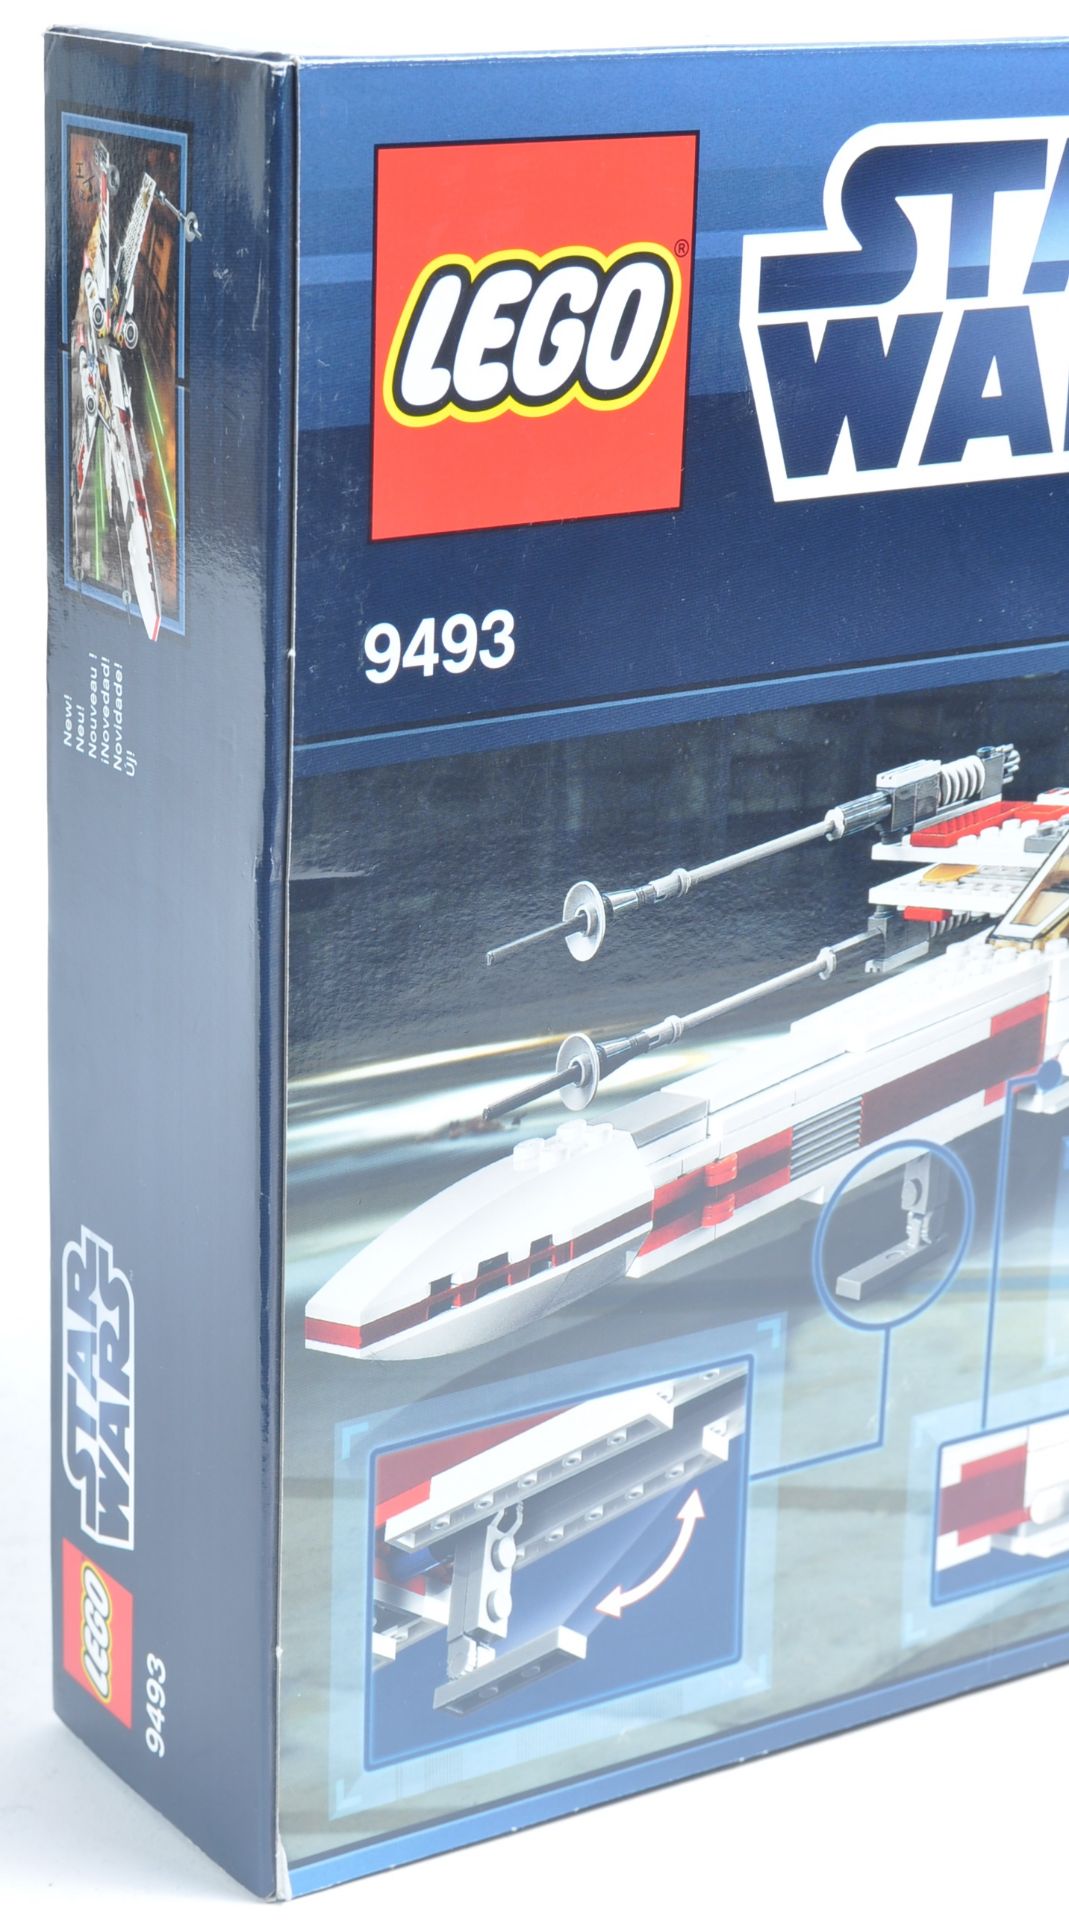 LEGO SET - LEGO STAR WARS - 9493 - X-WING STARFIGHTER - Image 4 of 4